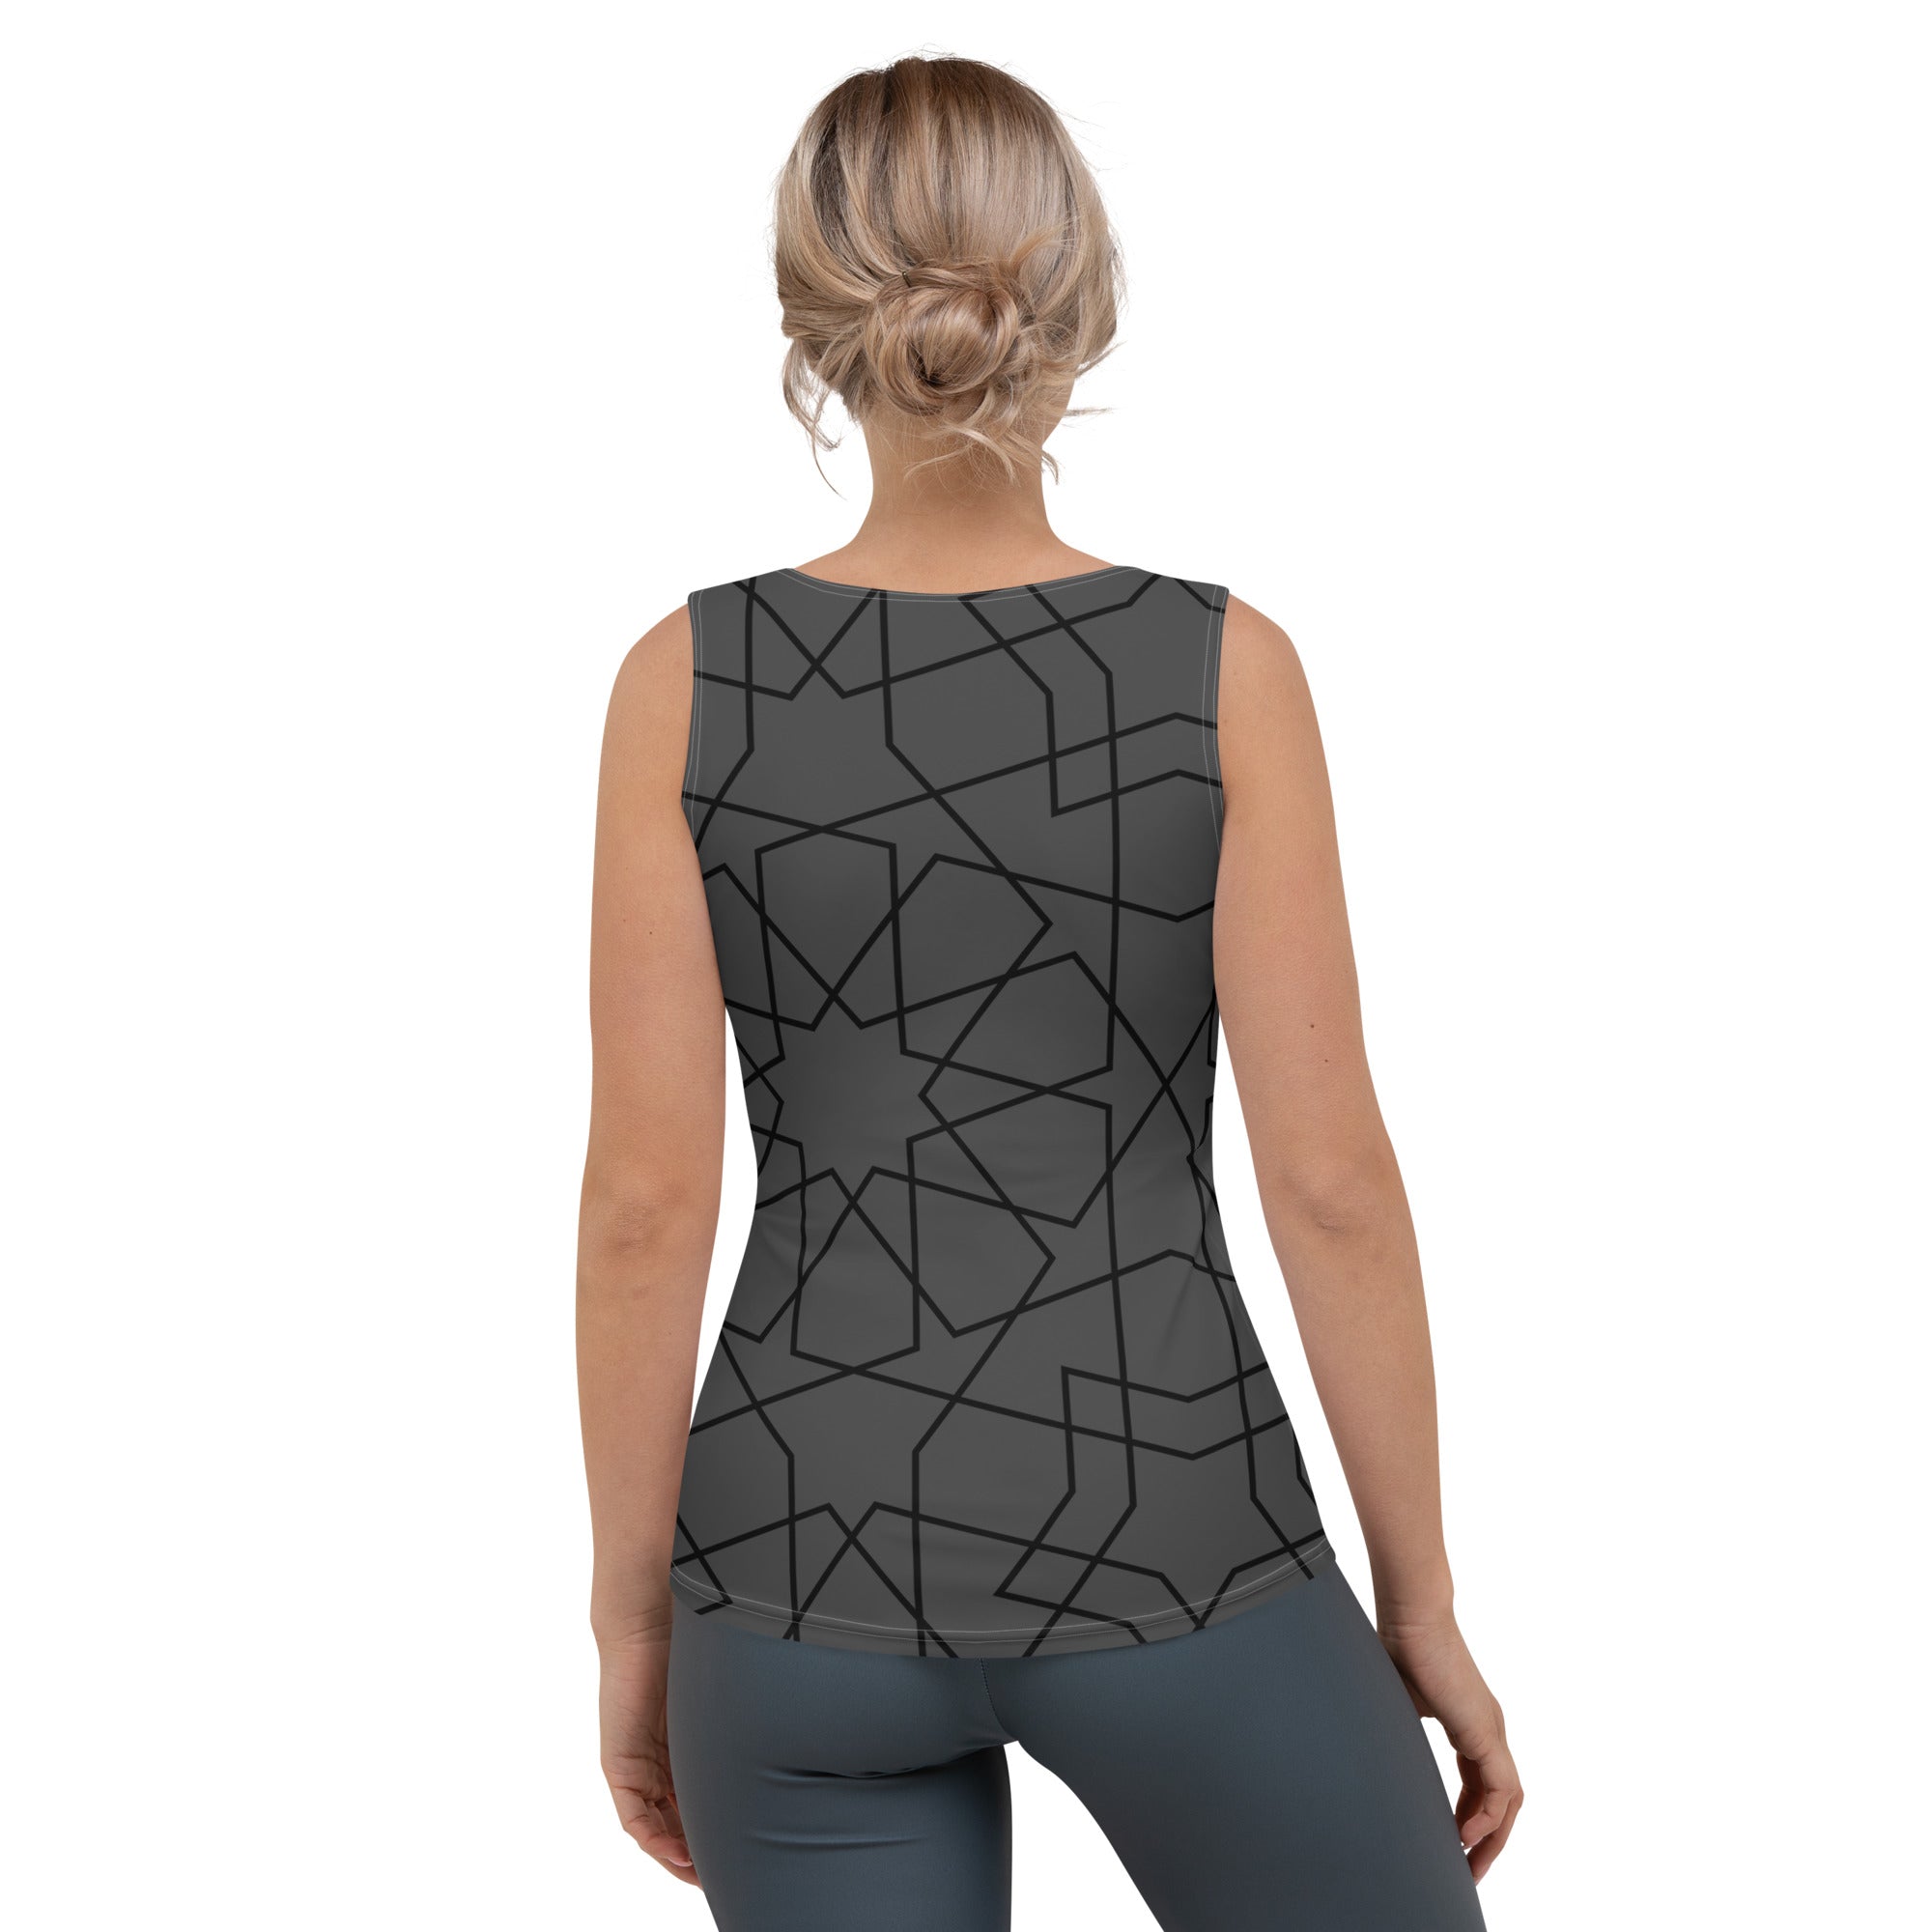 BE3 Star Geo Sublimation Cut & Sew Tank Top